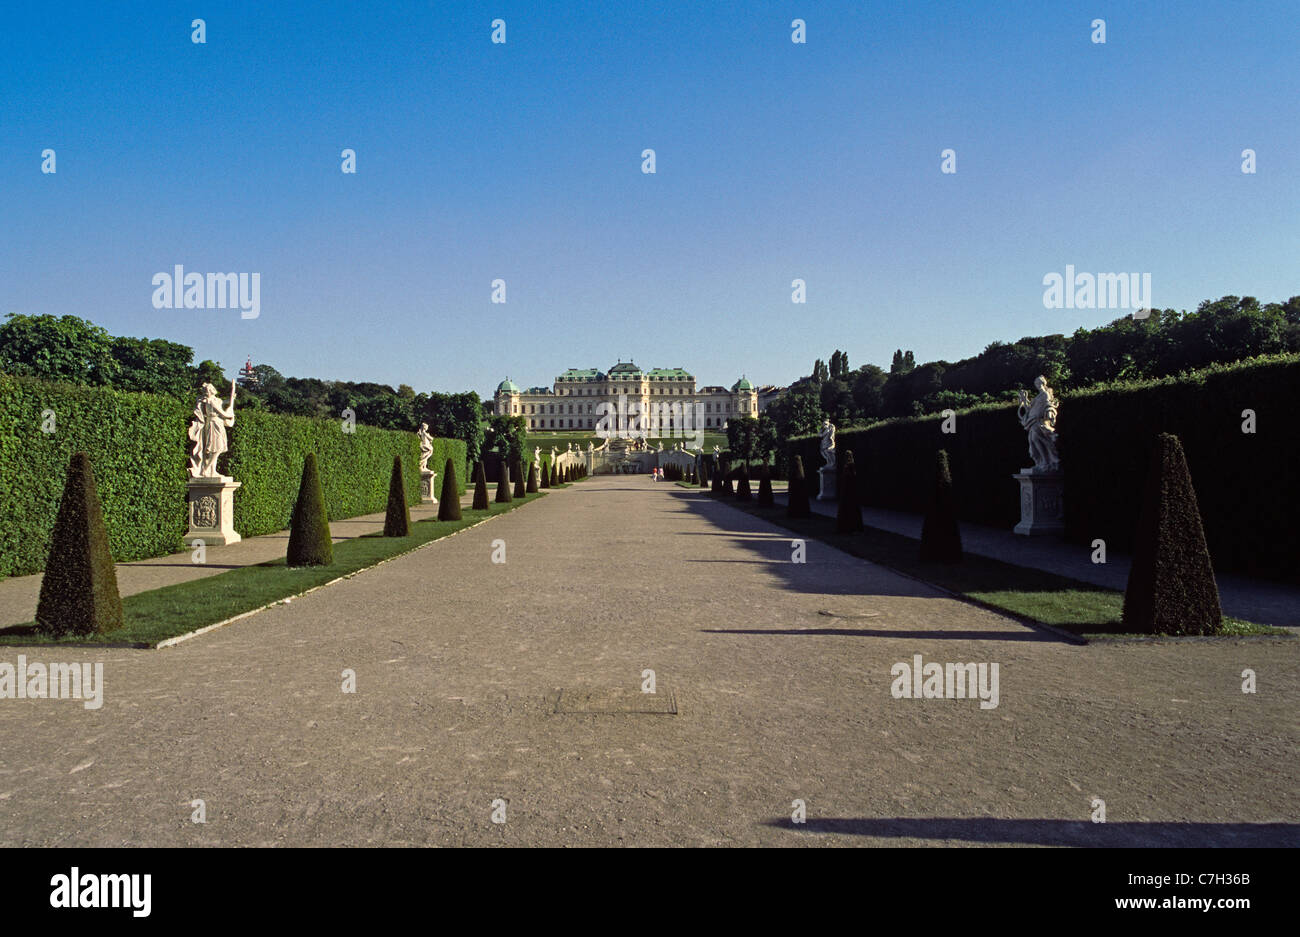 Austria, Vienna, view of long pathway entrance to Upper Belvedere palace Stock Photo